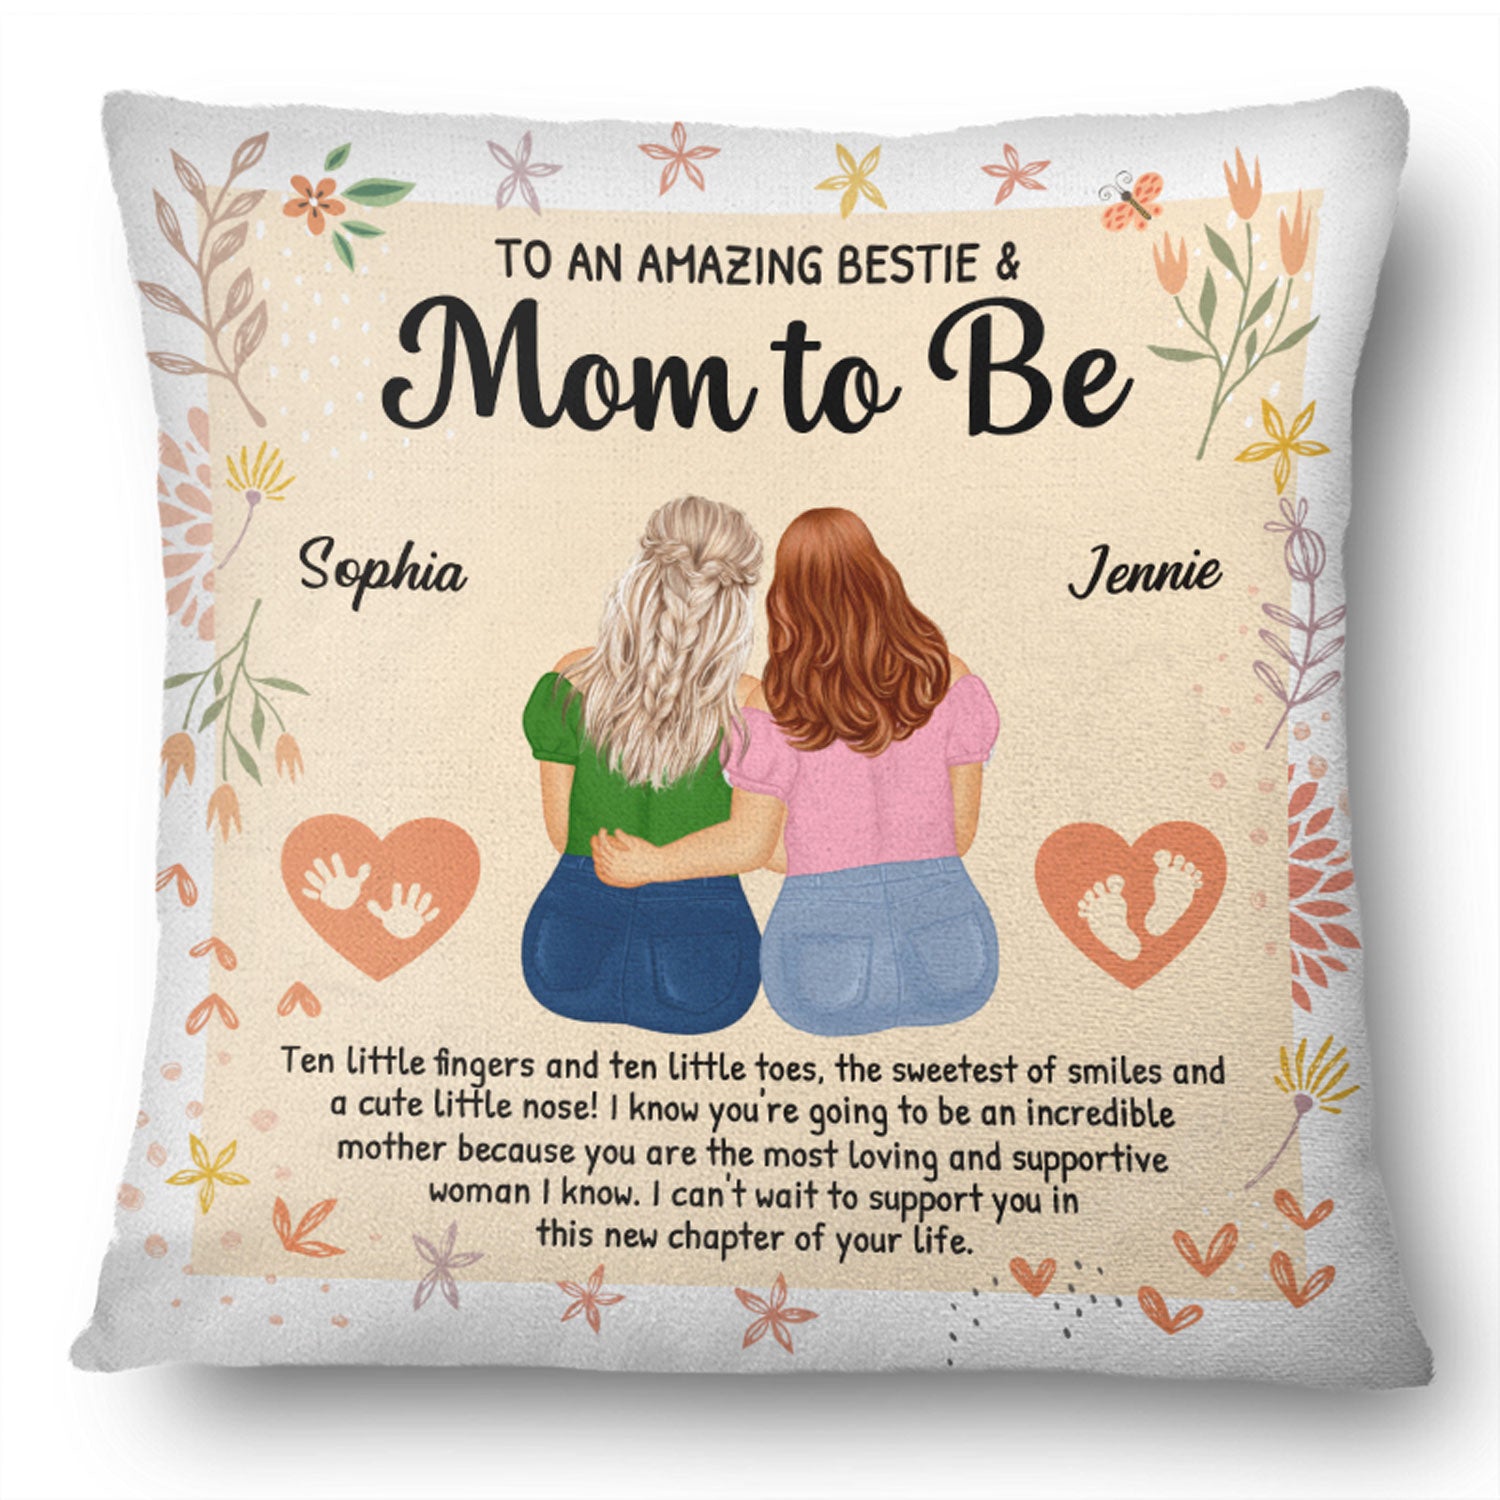 Amazing Bestie And Mom To Be - Gift For New Mom To Be - Personalized Pillow